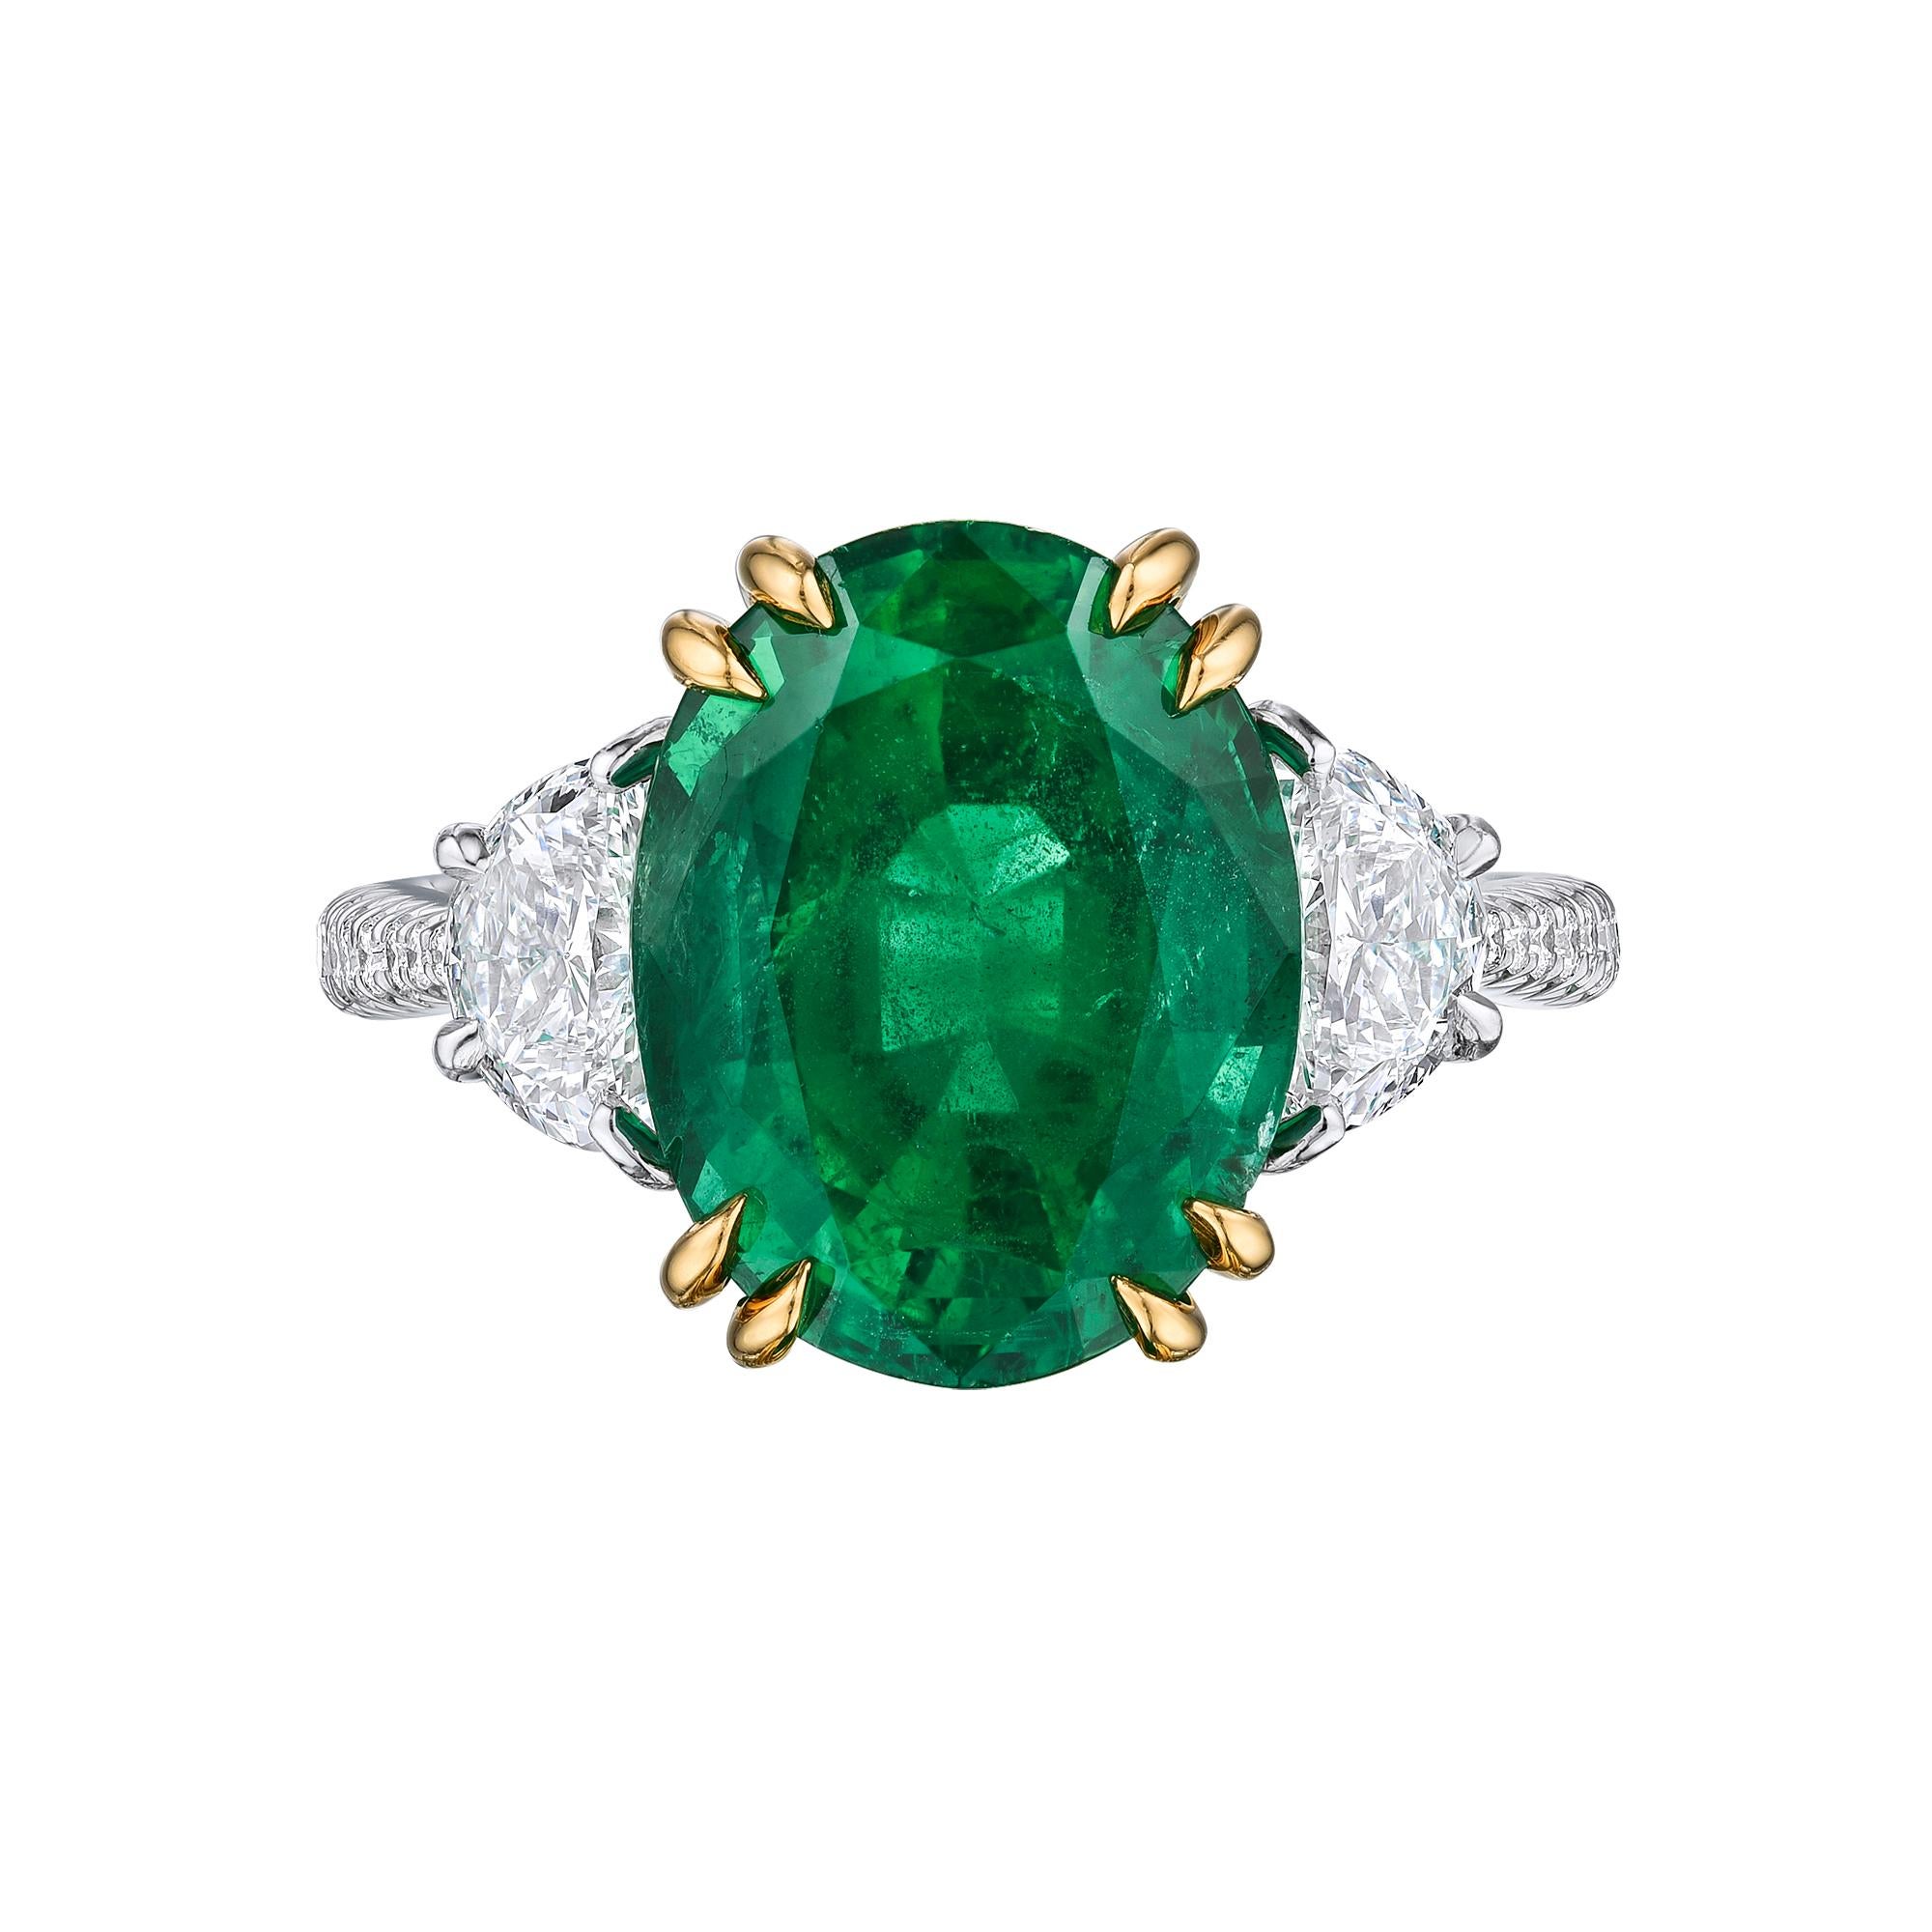 Oval Green Emerald Cocktail Ring set in Platinum with 18K yellow gold prongs. 5.72ct Intense green Emerald stone set in platinum with half moon and brilliant round cut diamonds. Center stone is 5.72 carats, side stones: 1.20 carats F-G Vs1_Vs2.